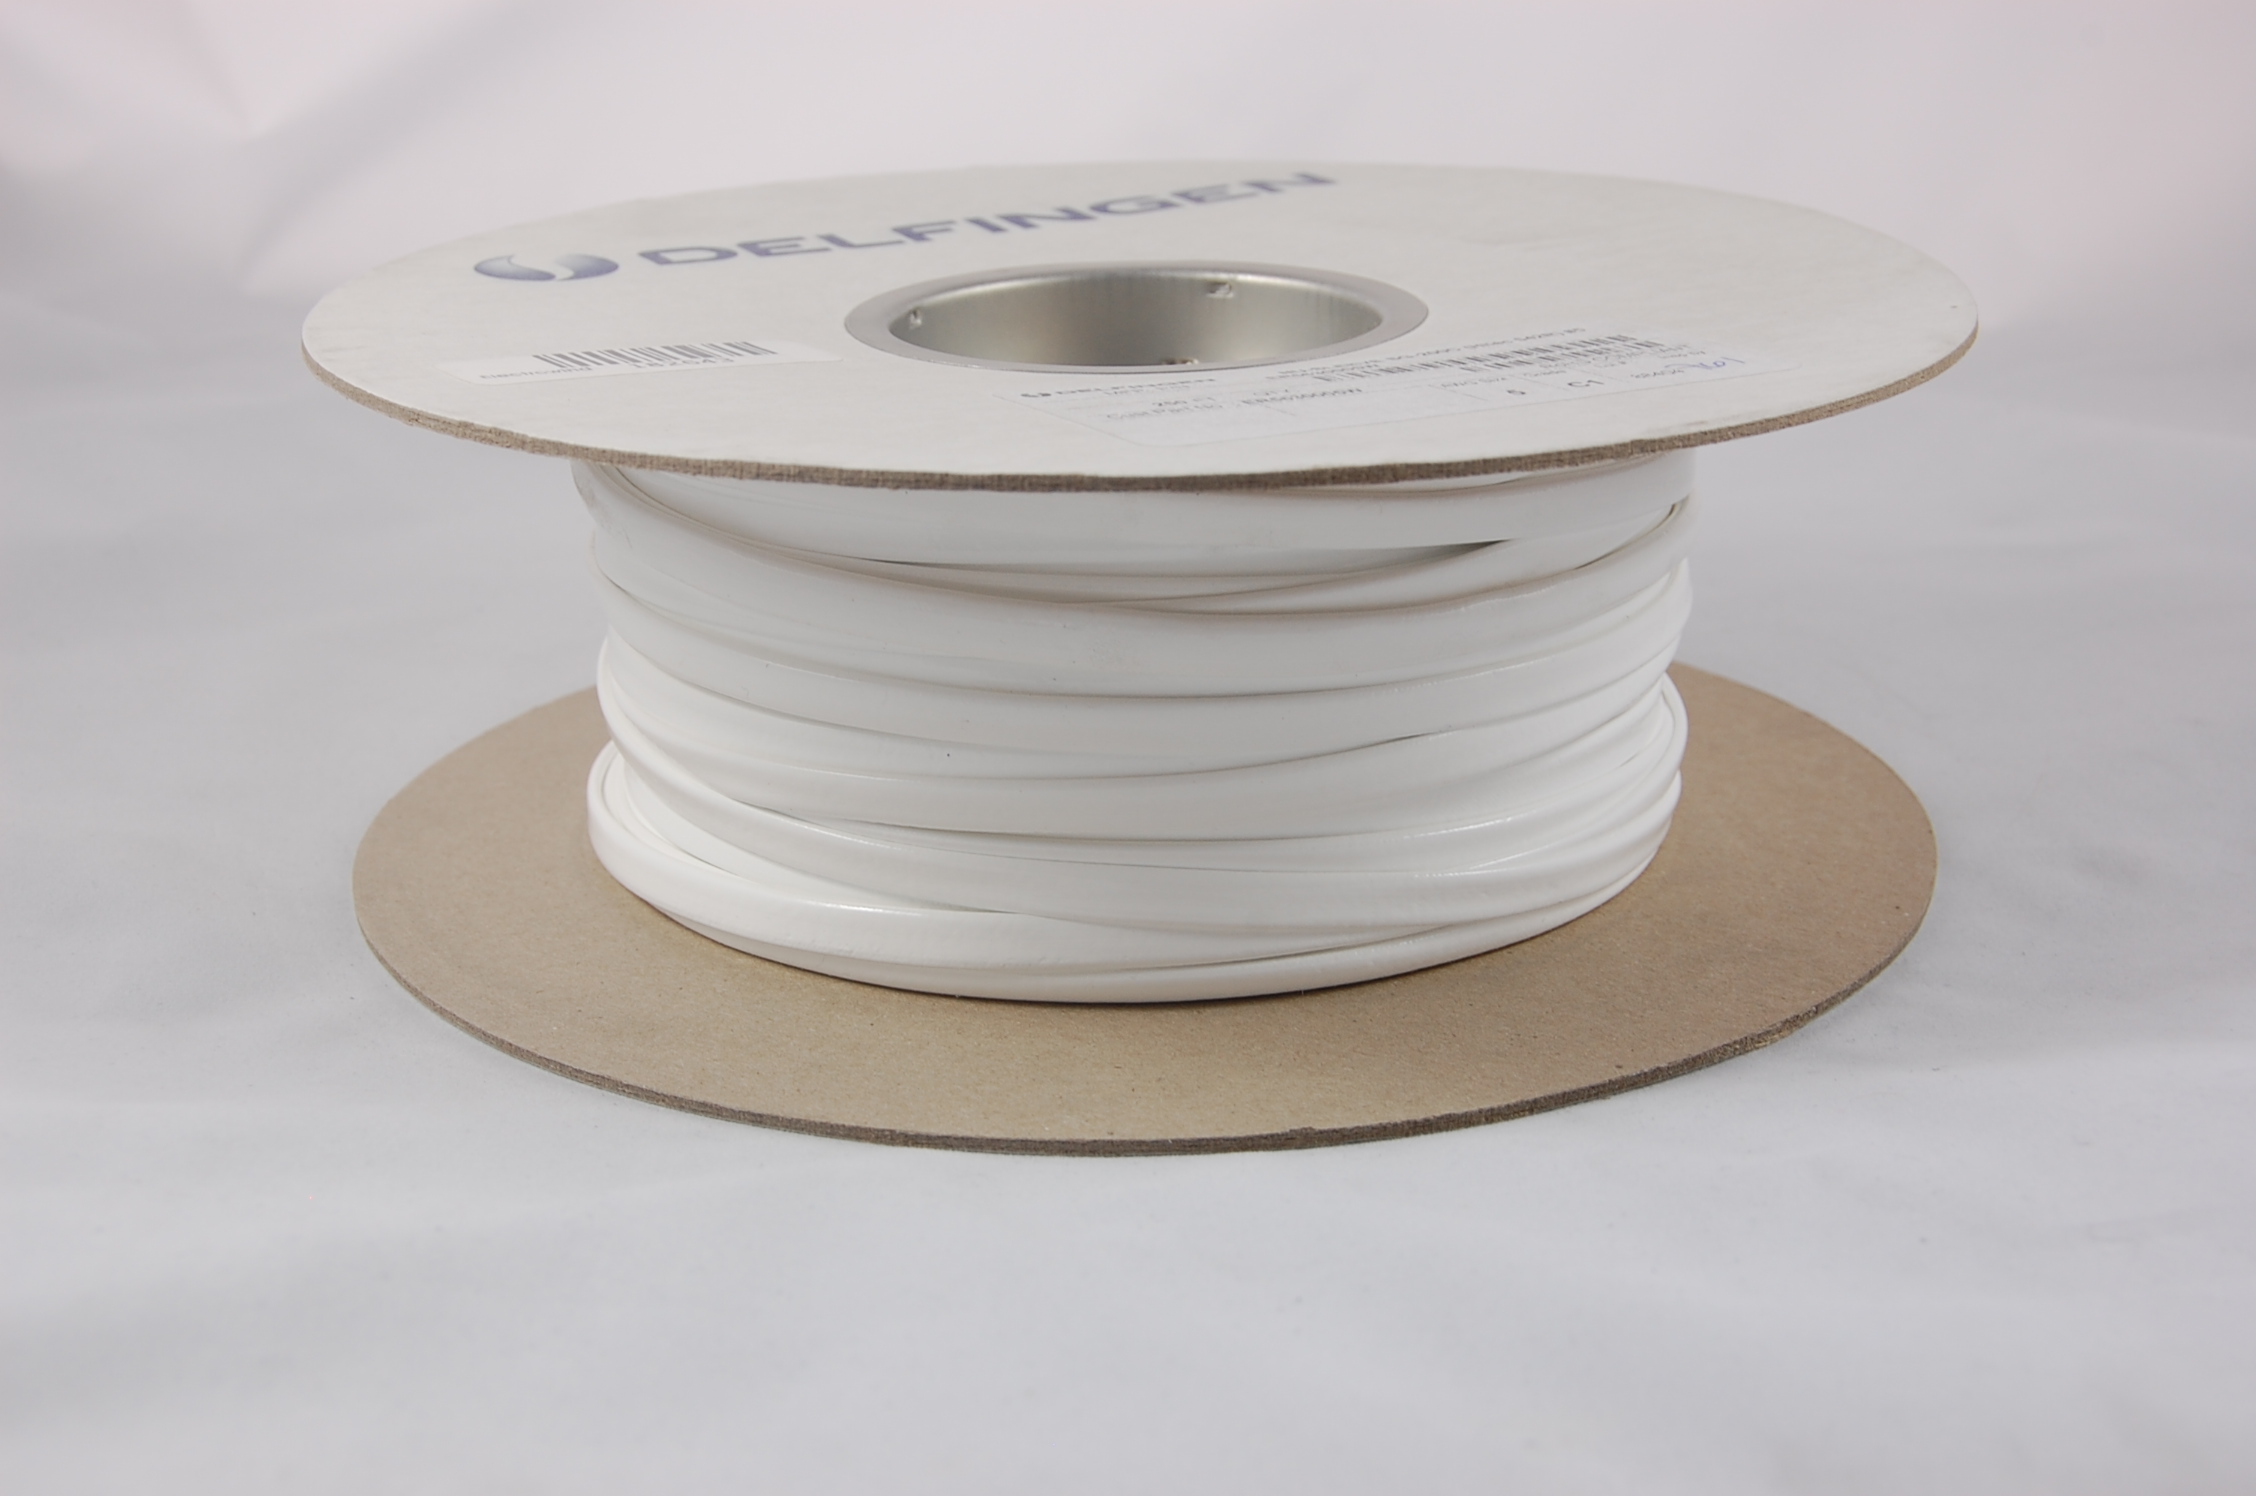 3/4" AWG NU-SLEEVE SG-200 A (7000V) Silicone Rubber Coated Braided Fiberglass Sleeving (547F) 200°C, white, 50 FT per spool